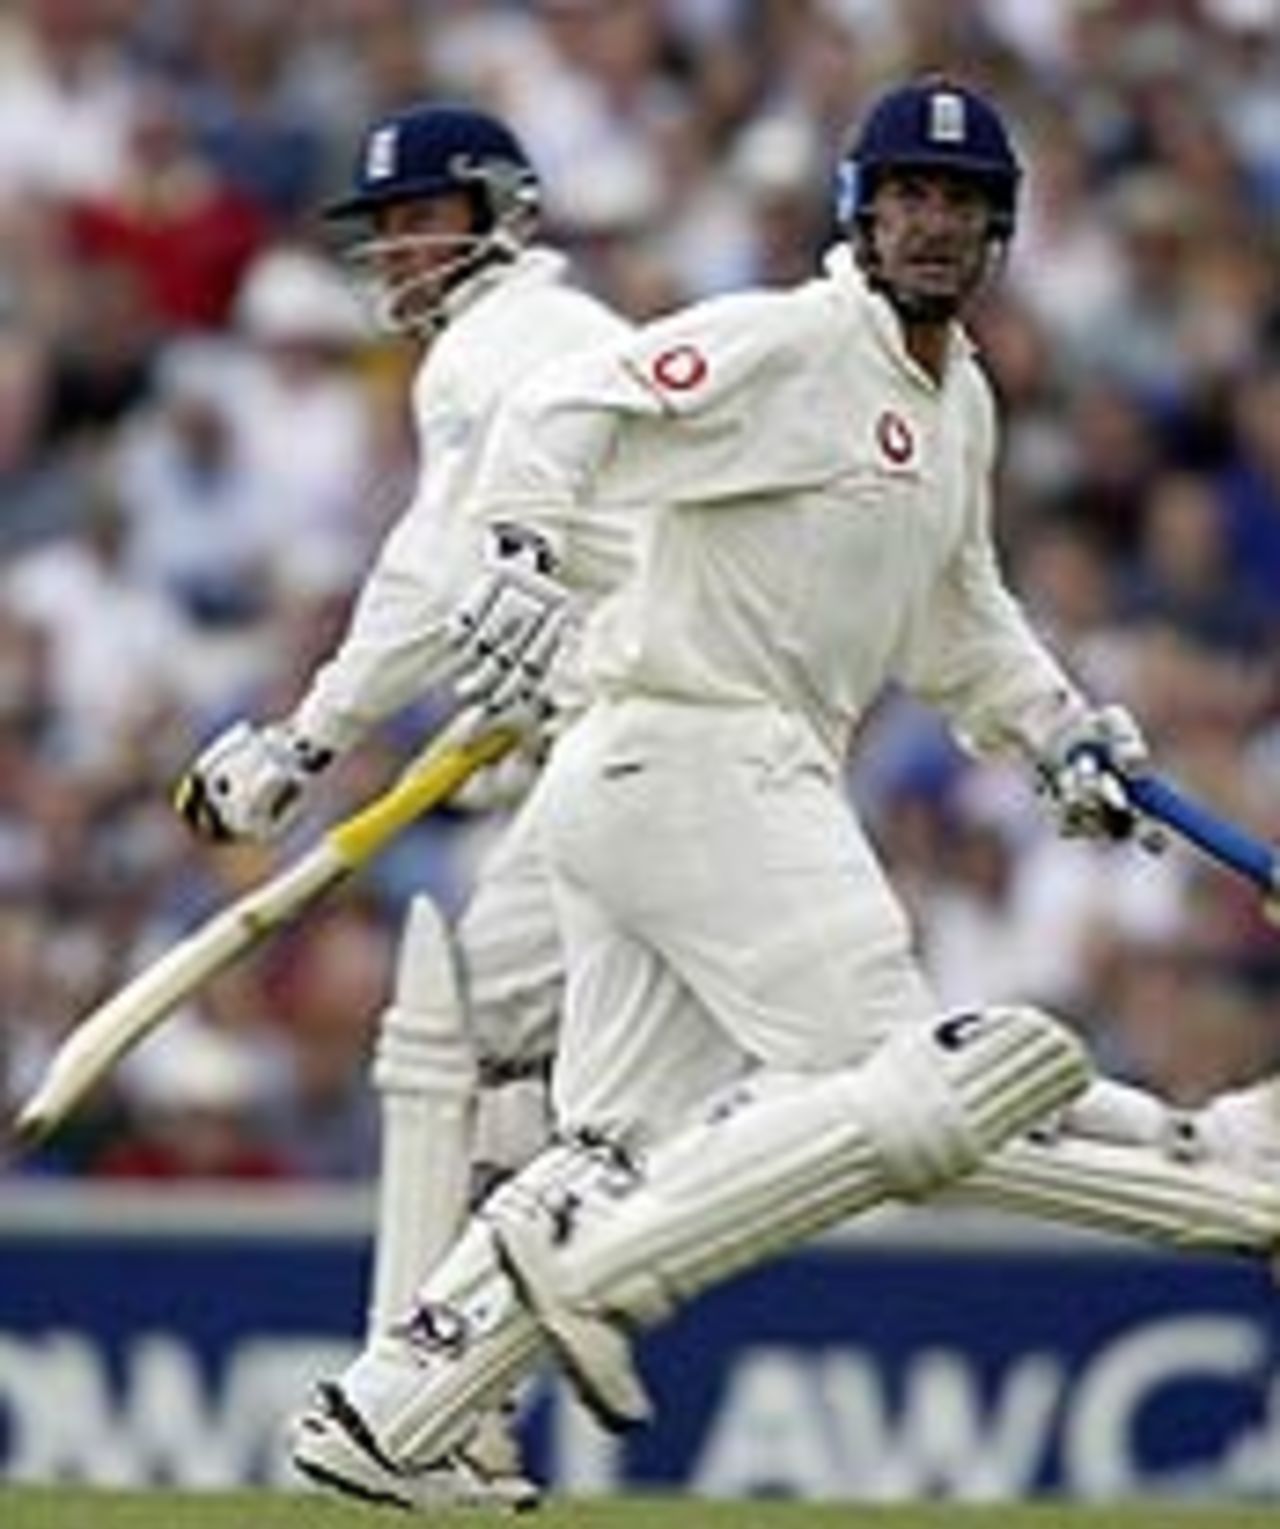 Graham Thorpe and Marcus Trecothick, England v South Africa, 5th Test, September 6, 2003